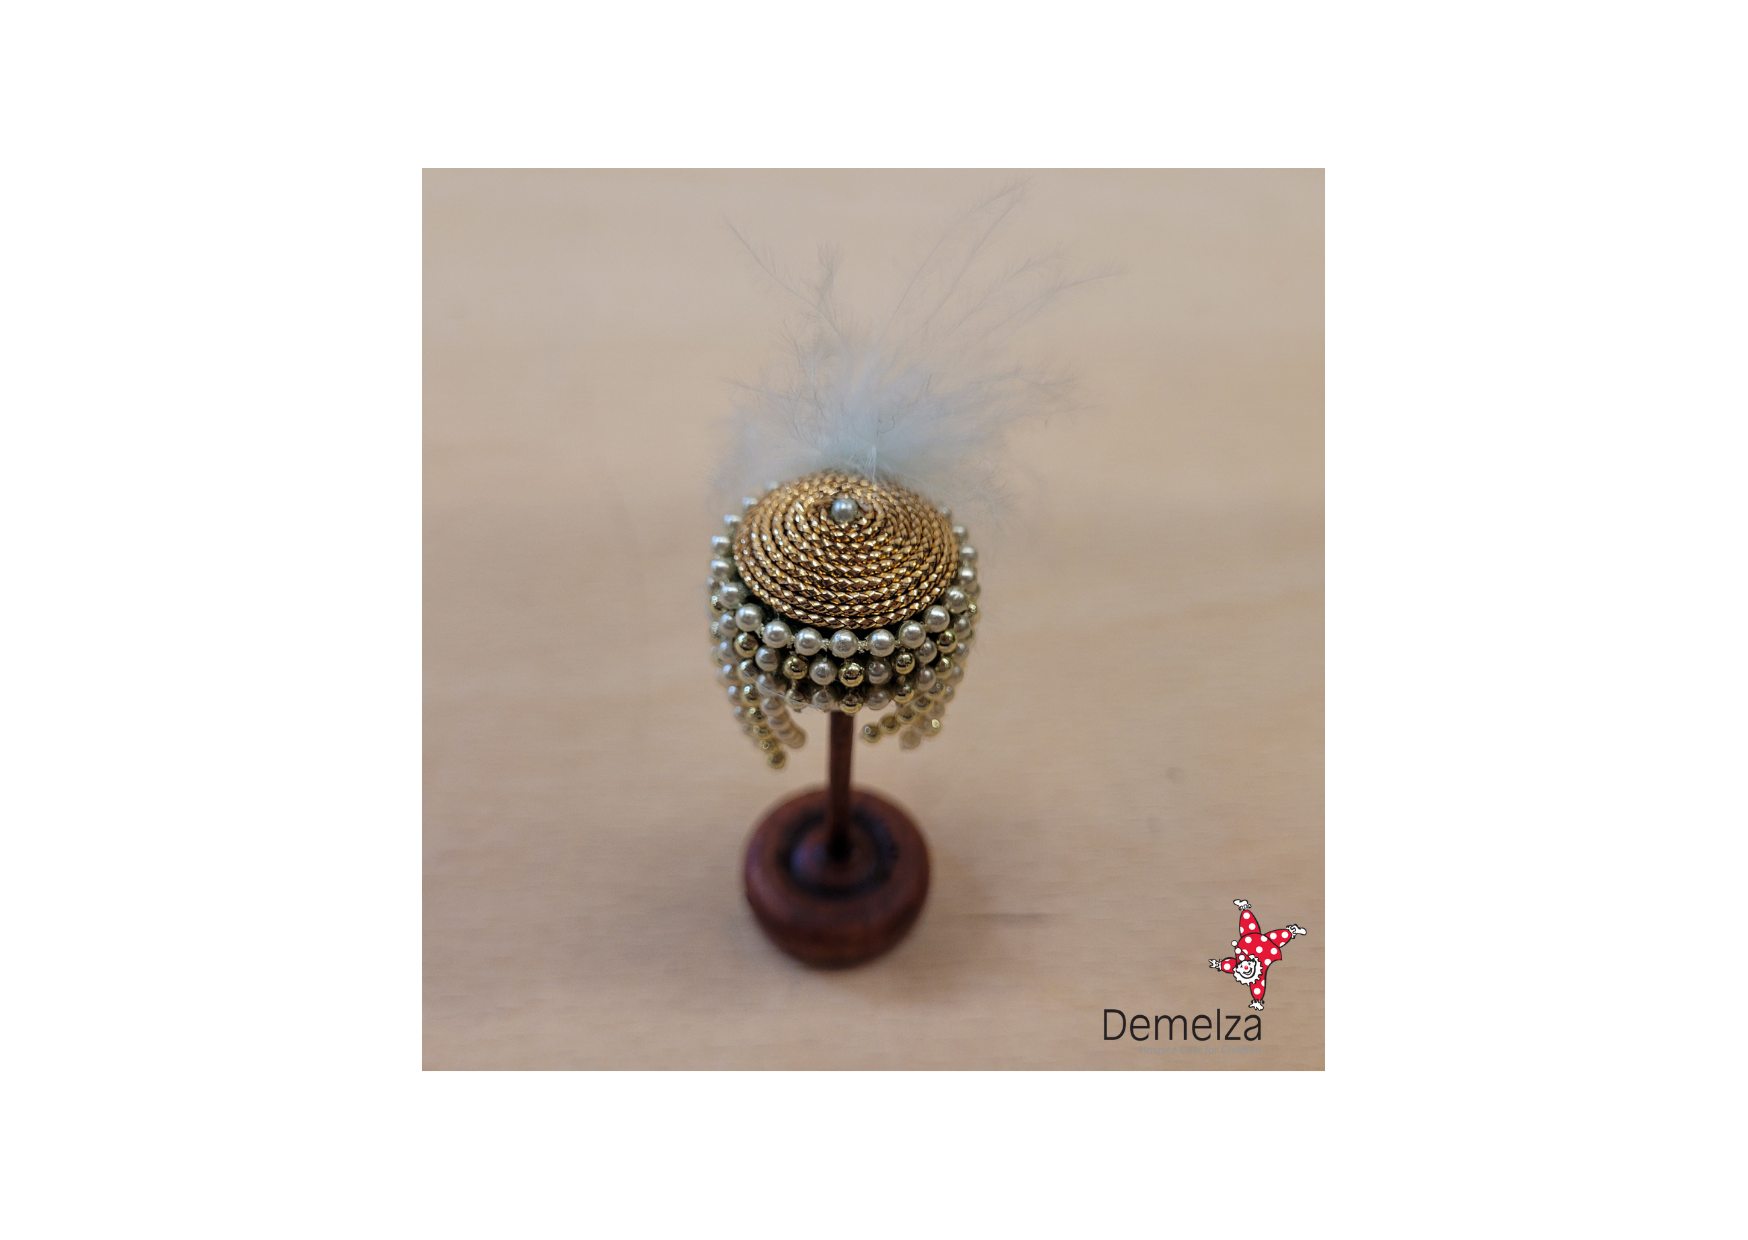 Dolls House 1:12 Scale Beaded Headdress with Feathers Top View